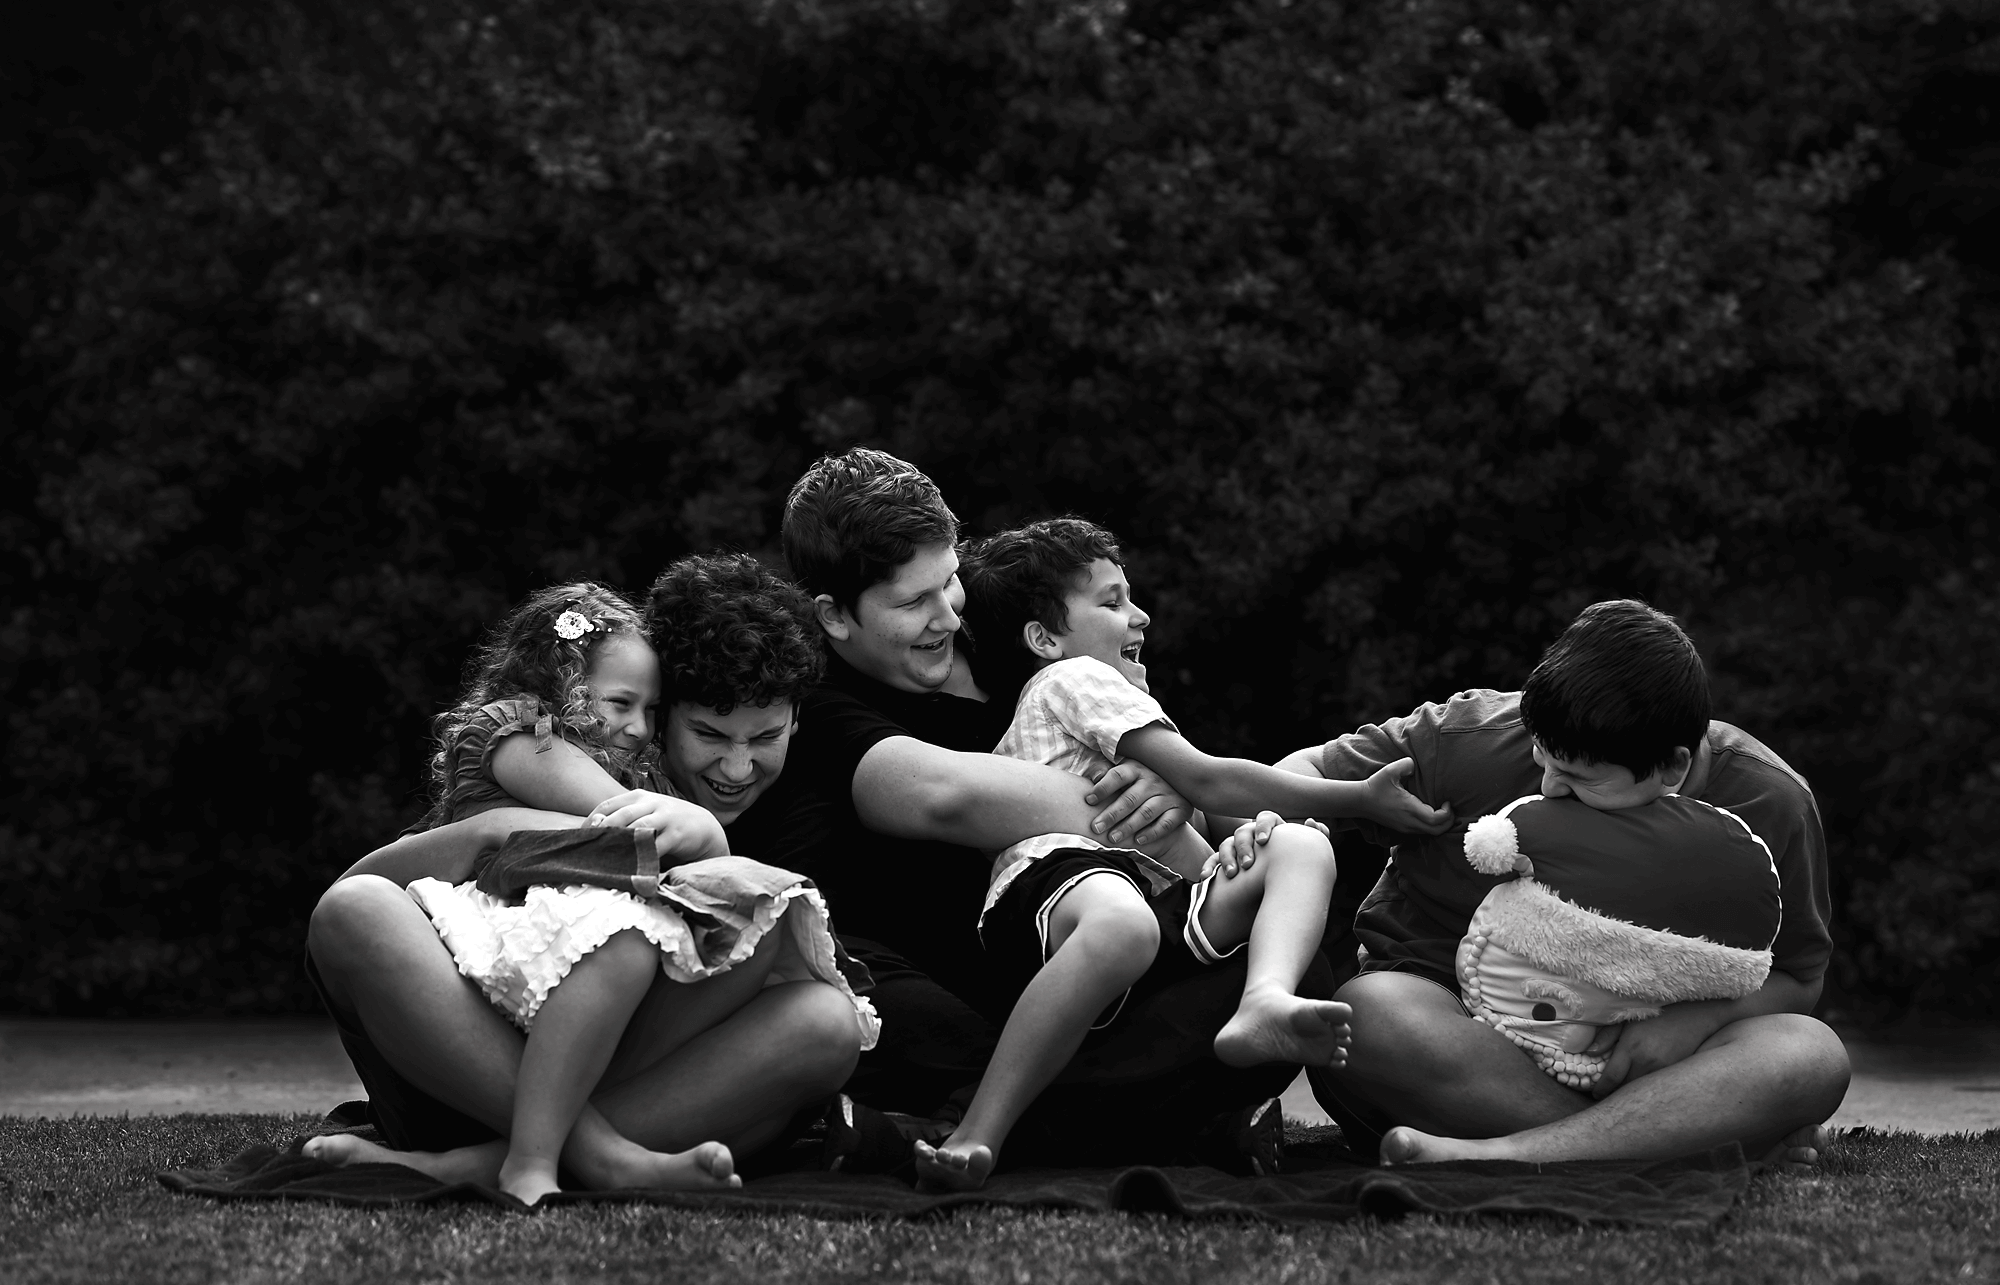 Four kids tickling in black and white